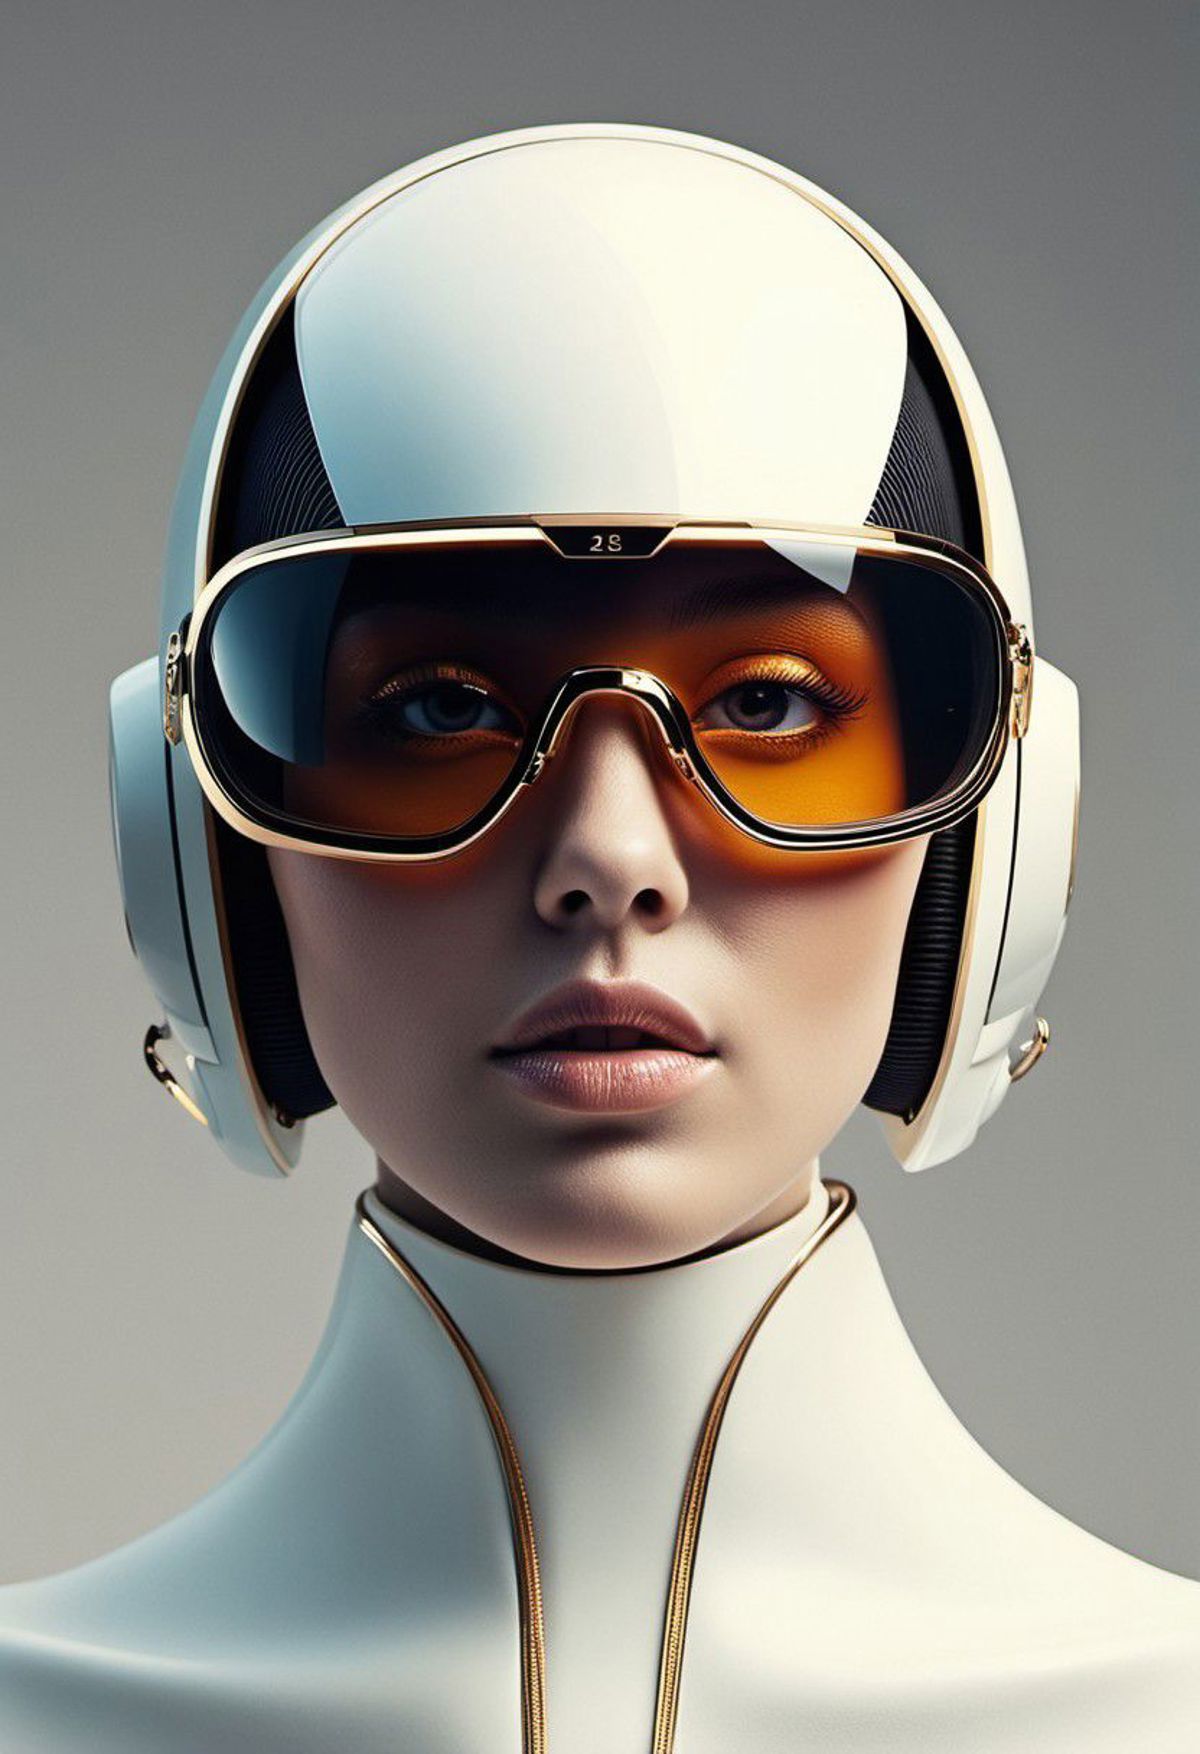 A woman wearing futuristic sunglasses and a white helmet.